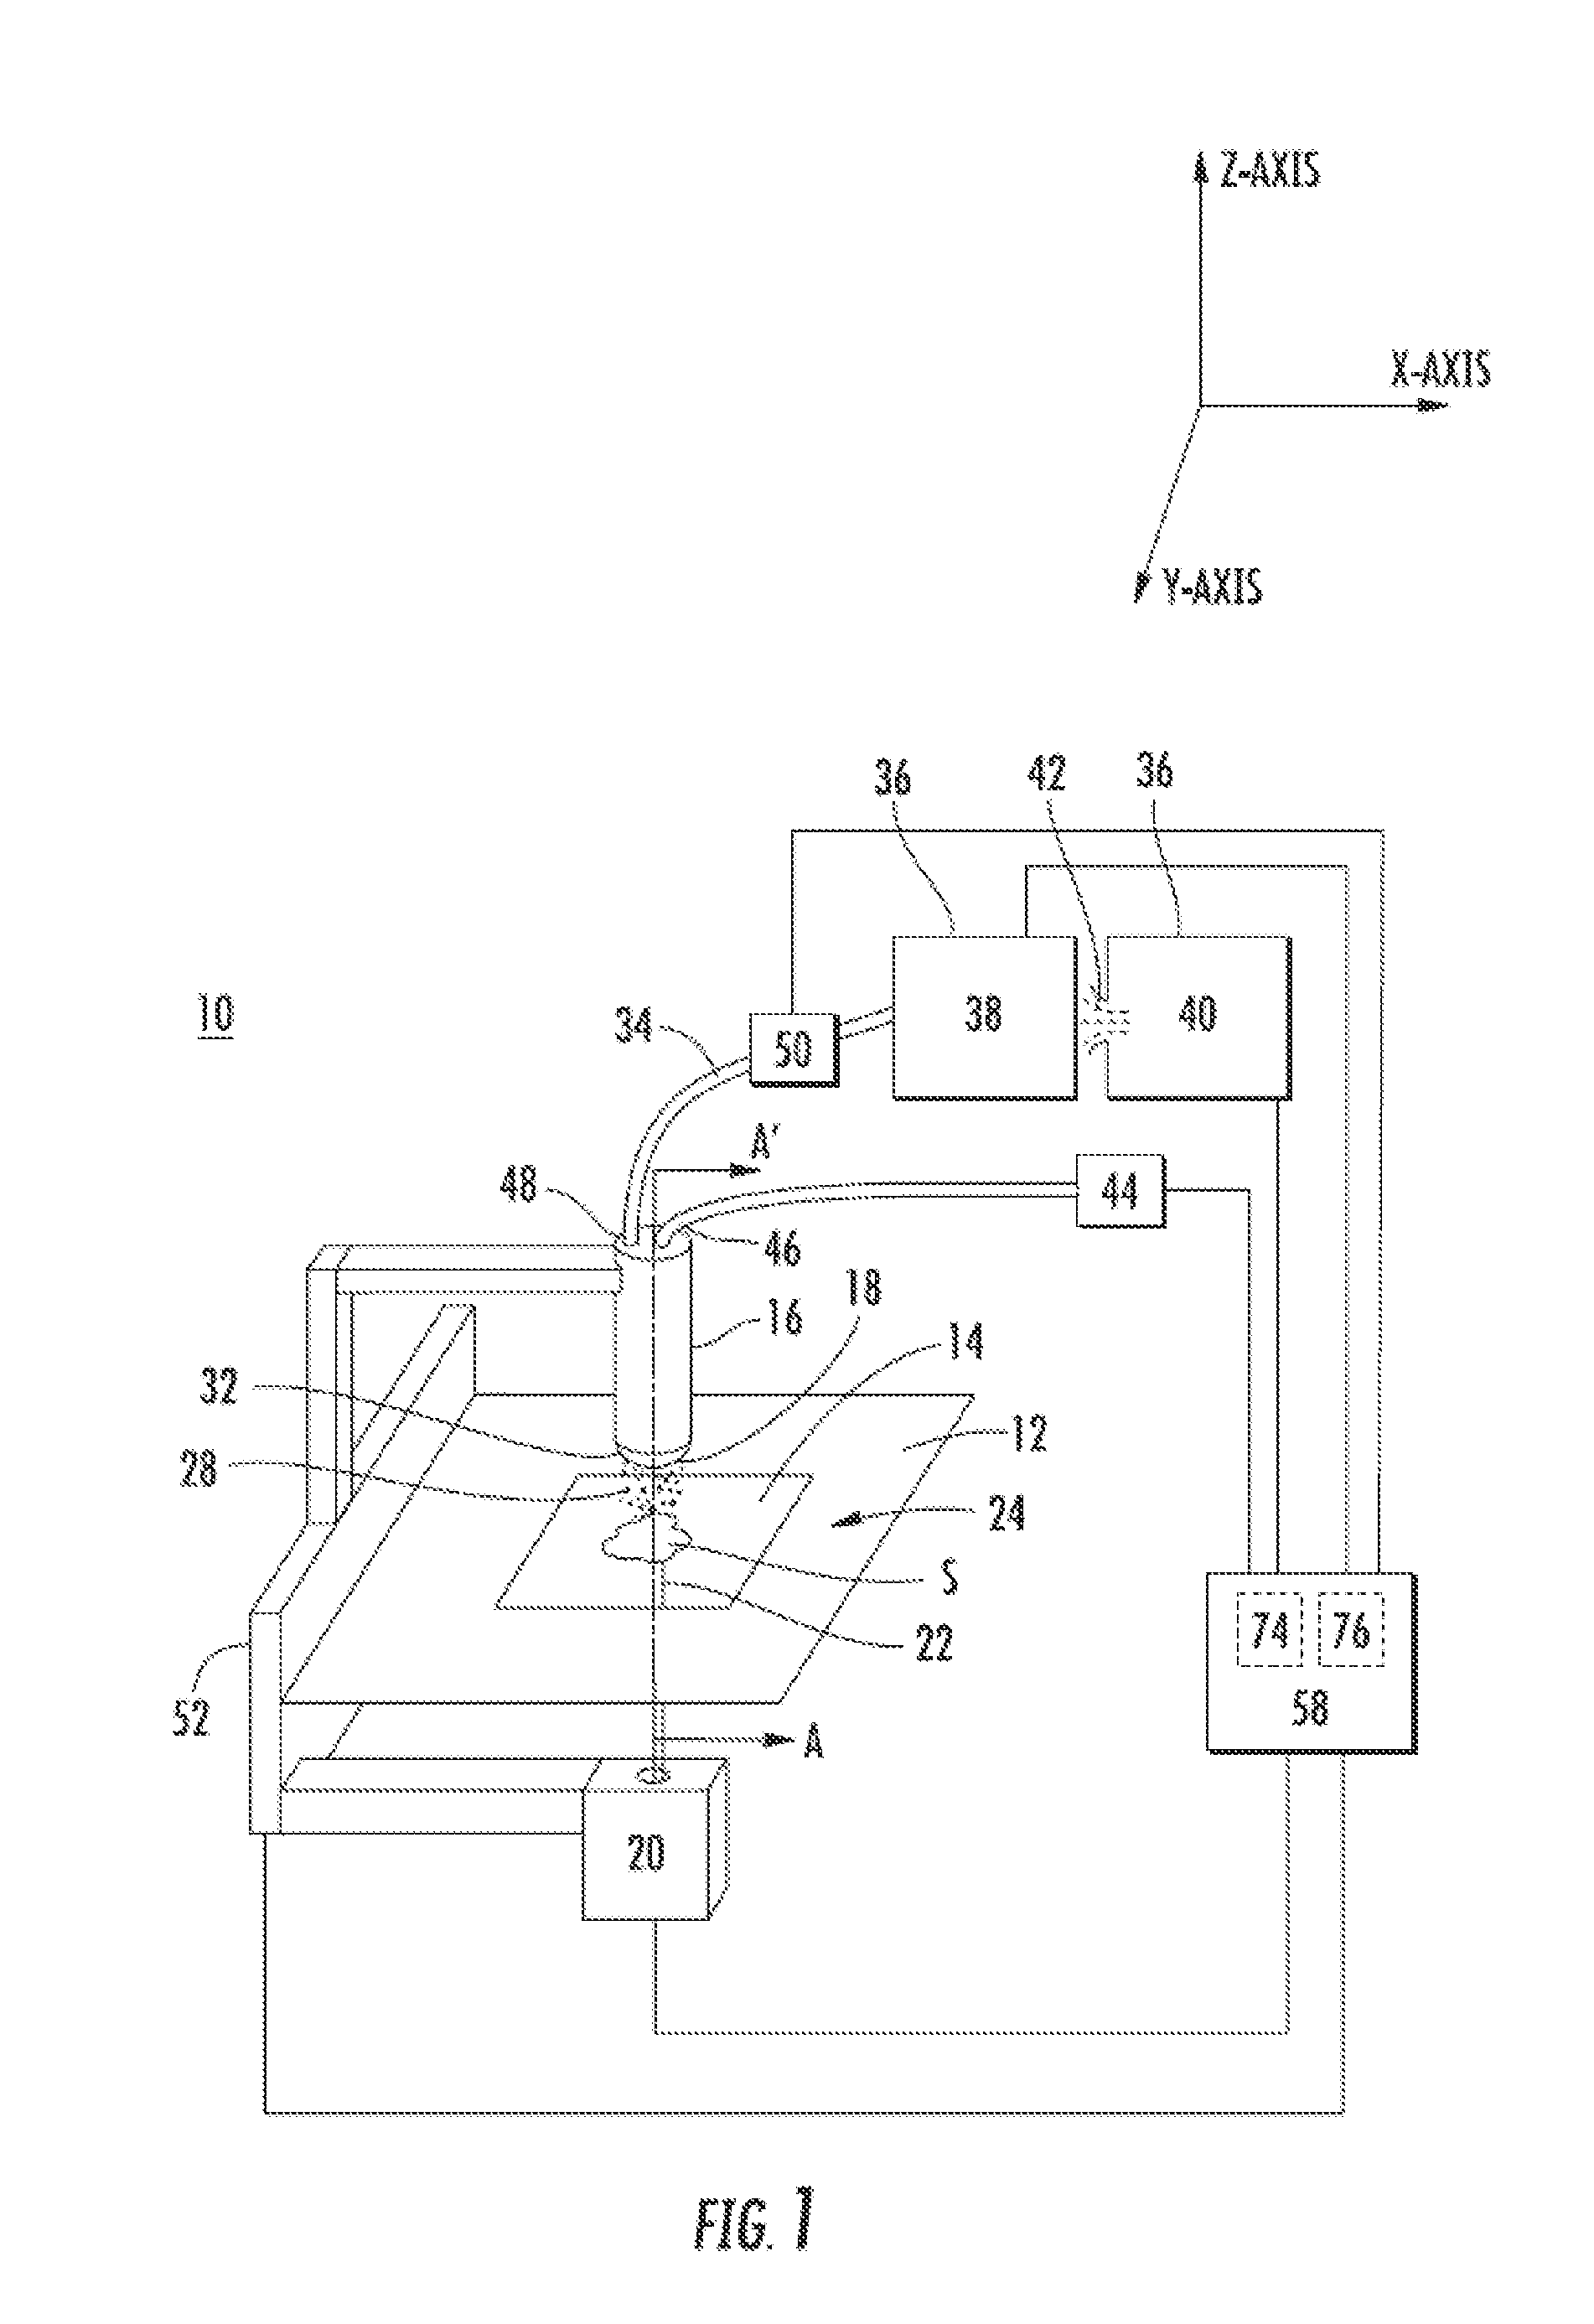 Systems and methods for laser assisted sample transfer to solution for chemical analysis